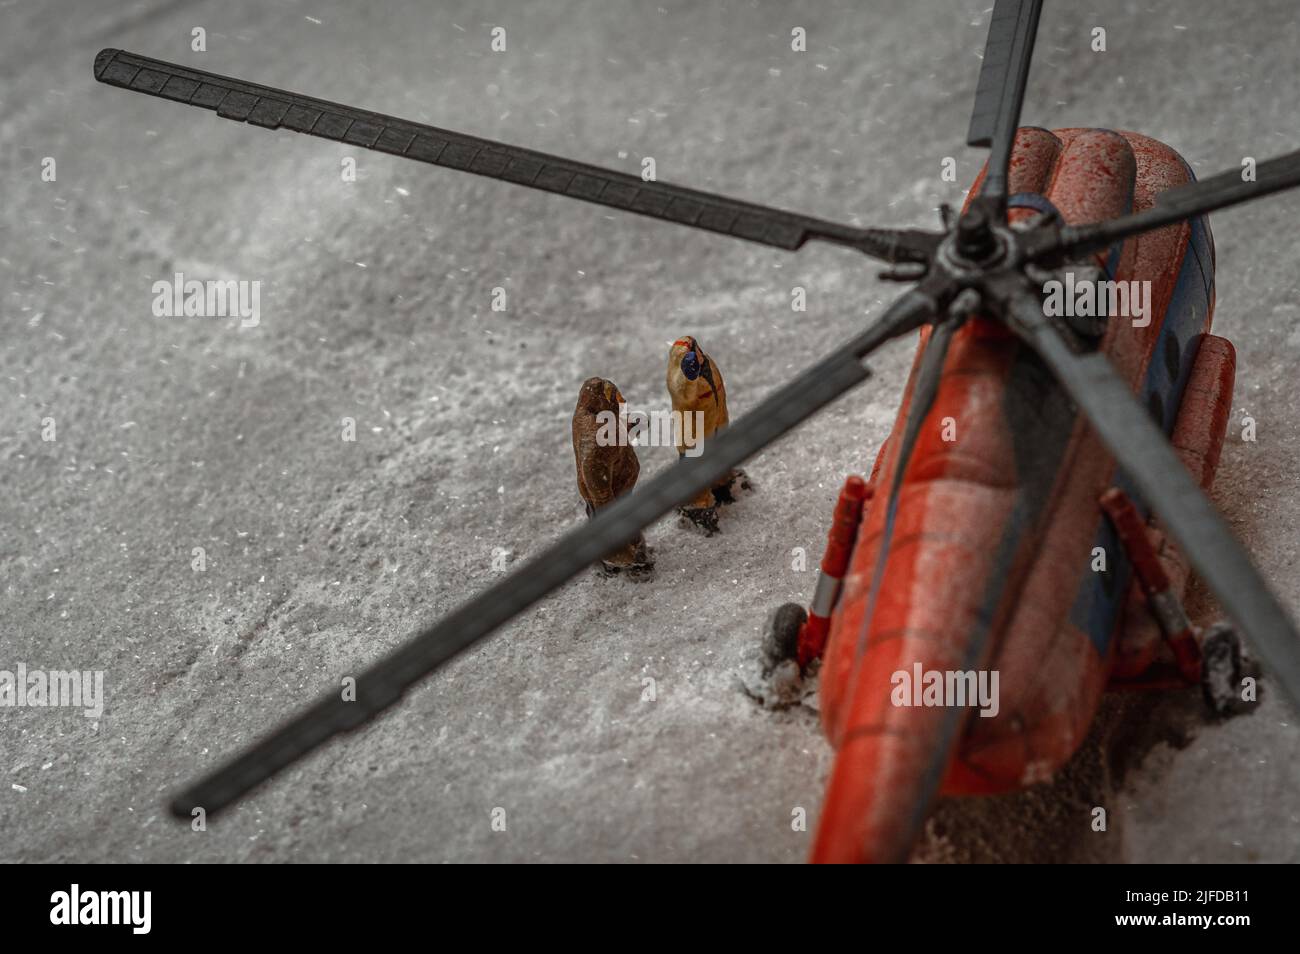 Toy representation of a red helicopter and two pilots in jumpsuits amid the snowstorm. Stock Photo